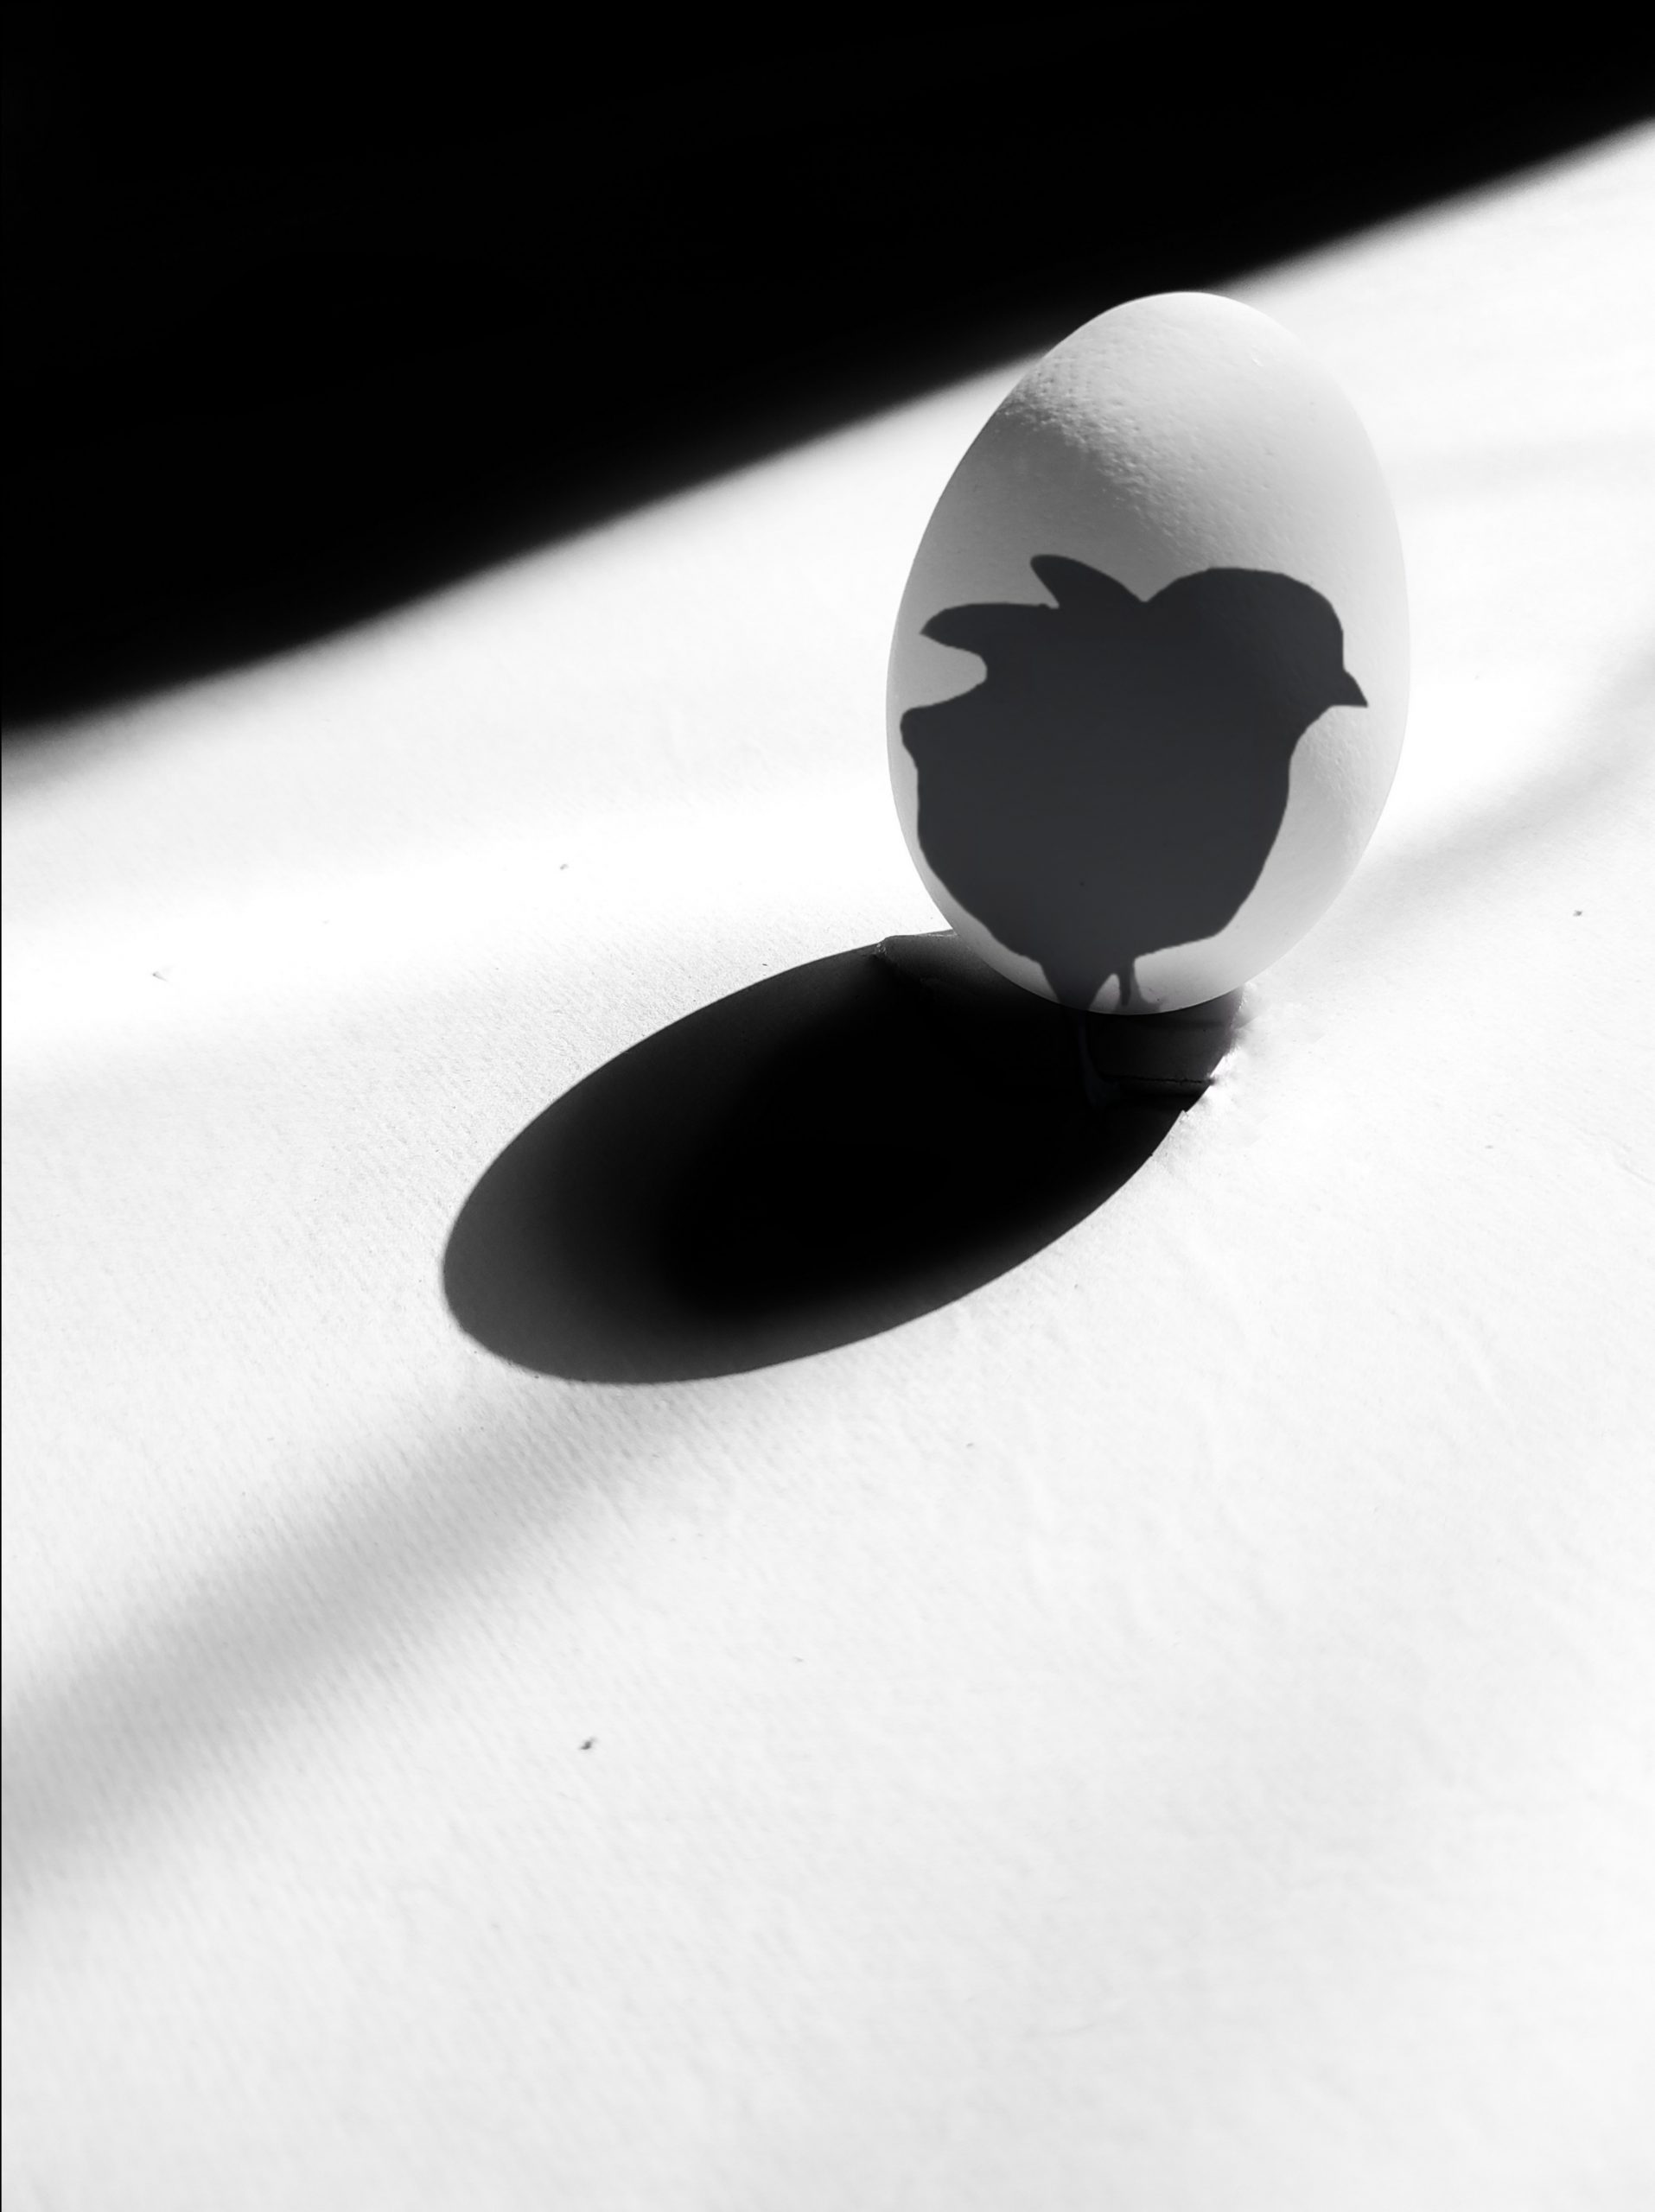 Shadow of chicken in egg